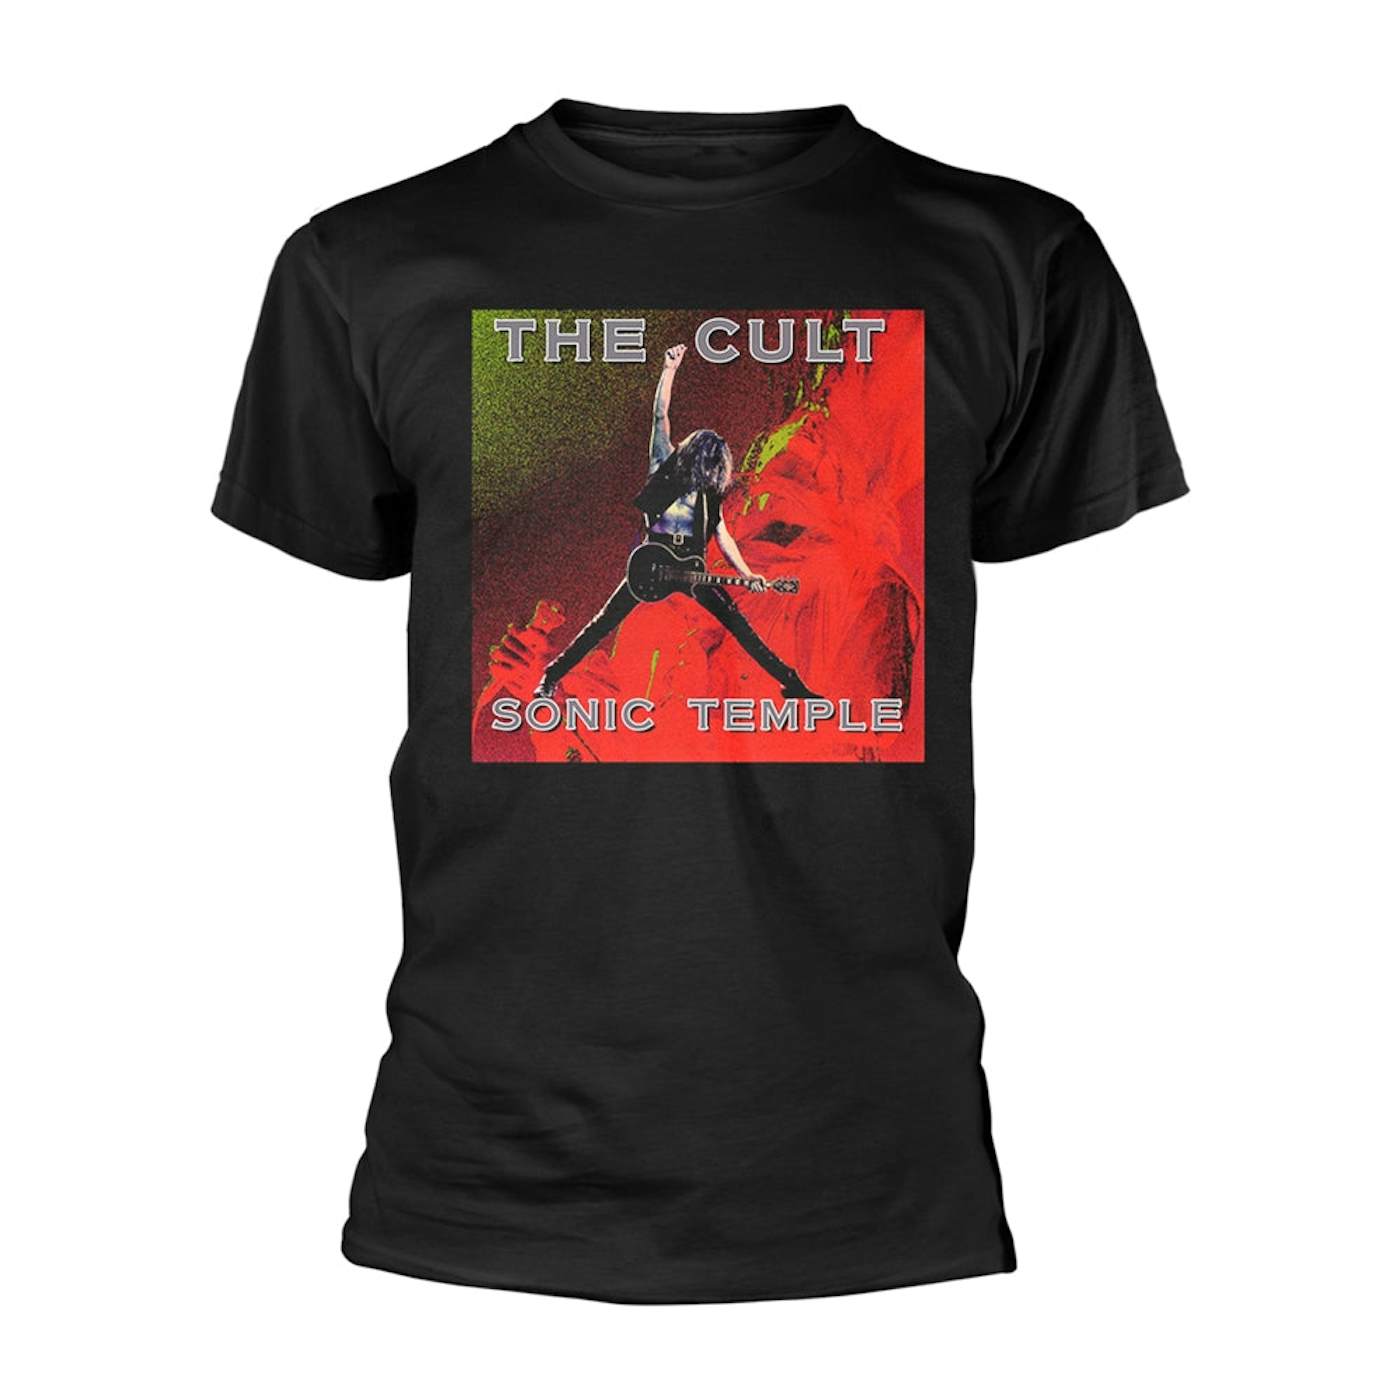 The Cult T Shirt - Sonic Temple